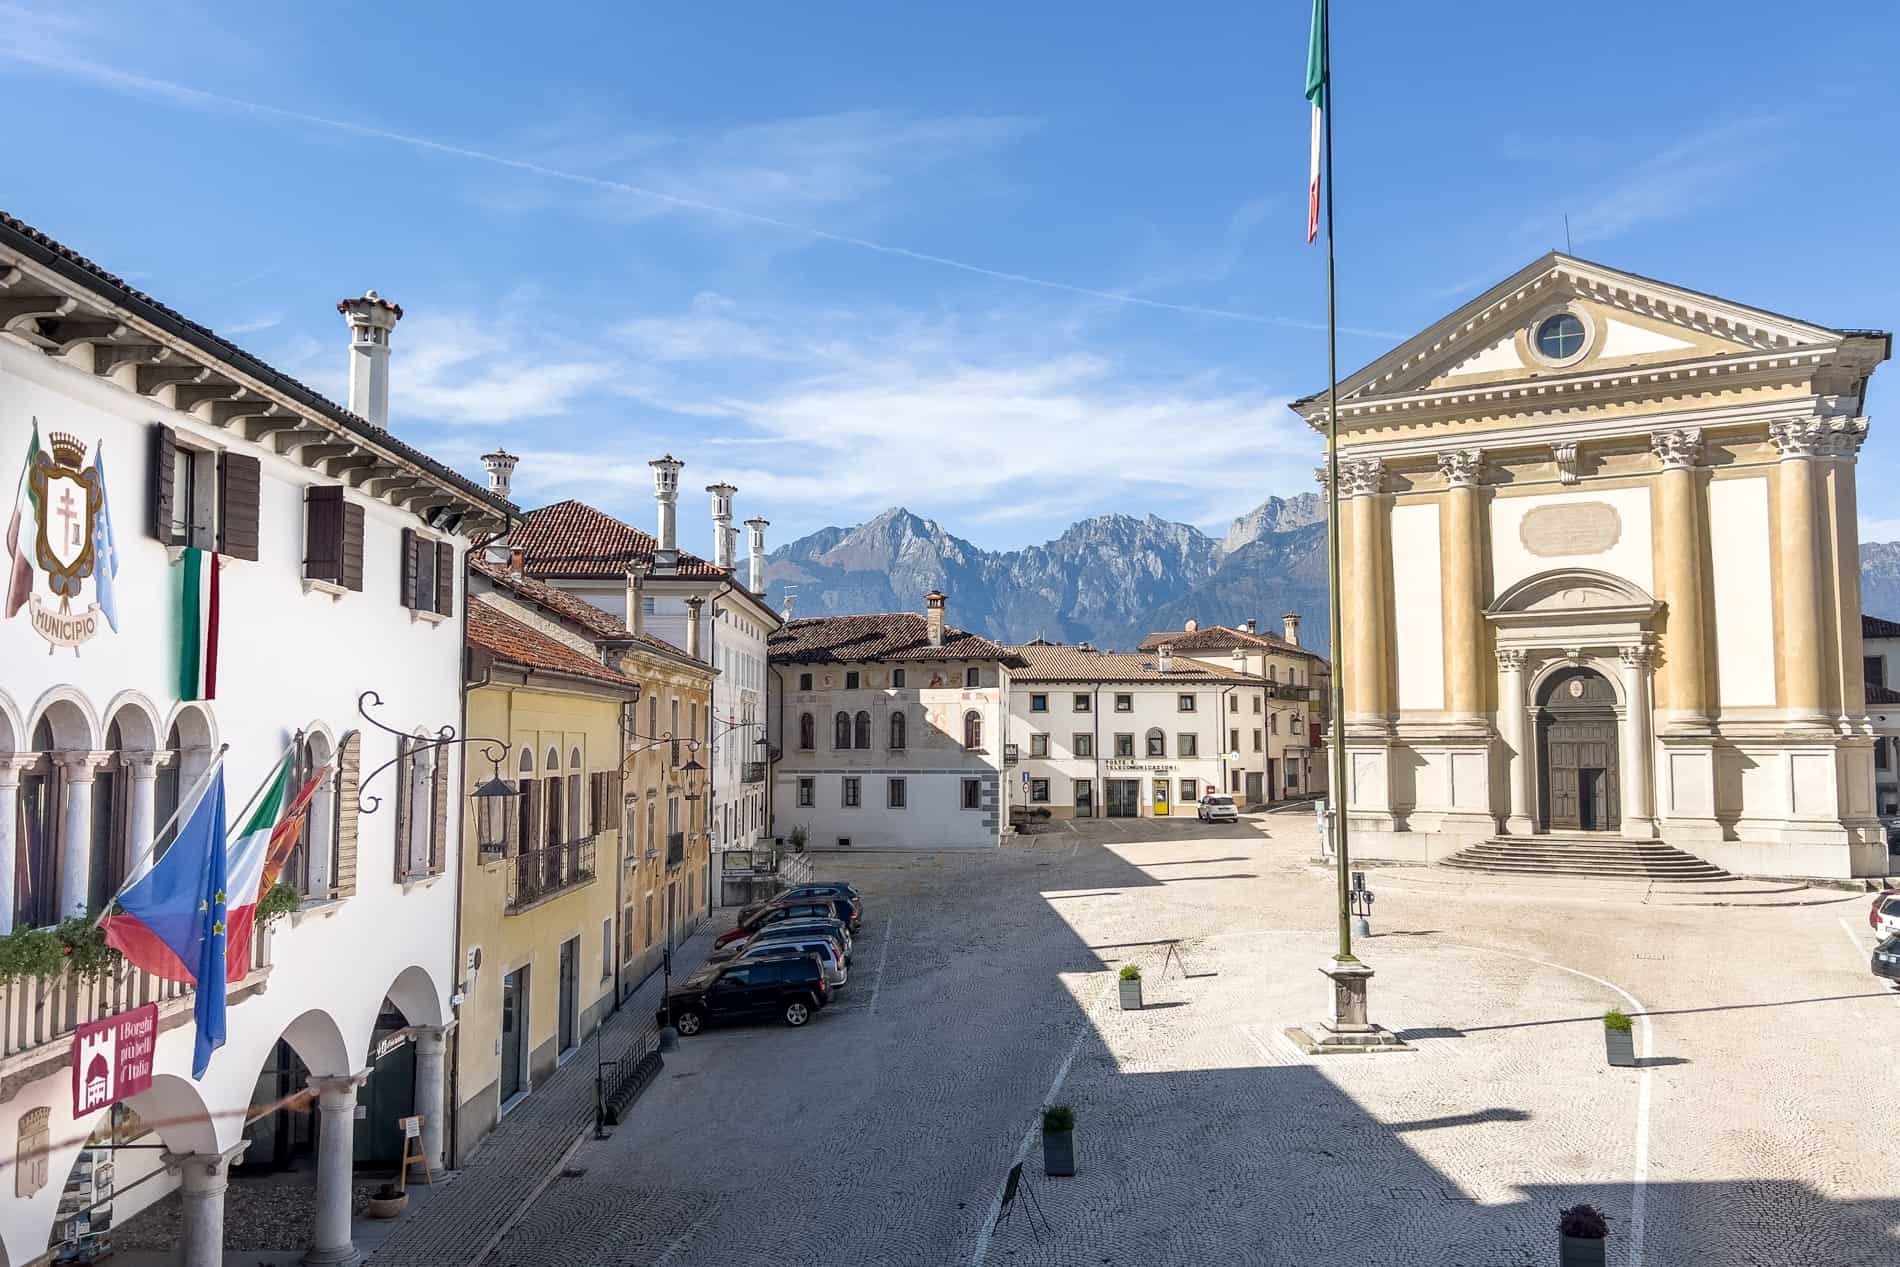 A square surrounded by Venetian villas and a classic, columned church, backed by the Dolomites mountains. 